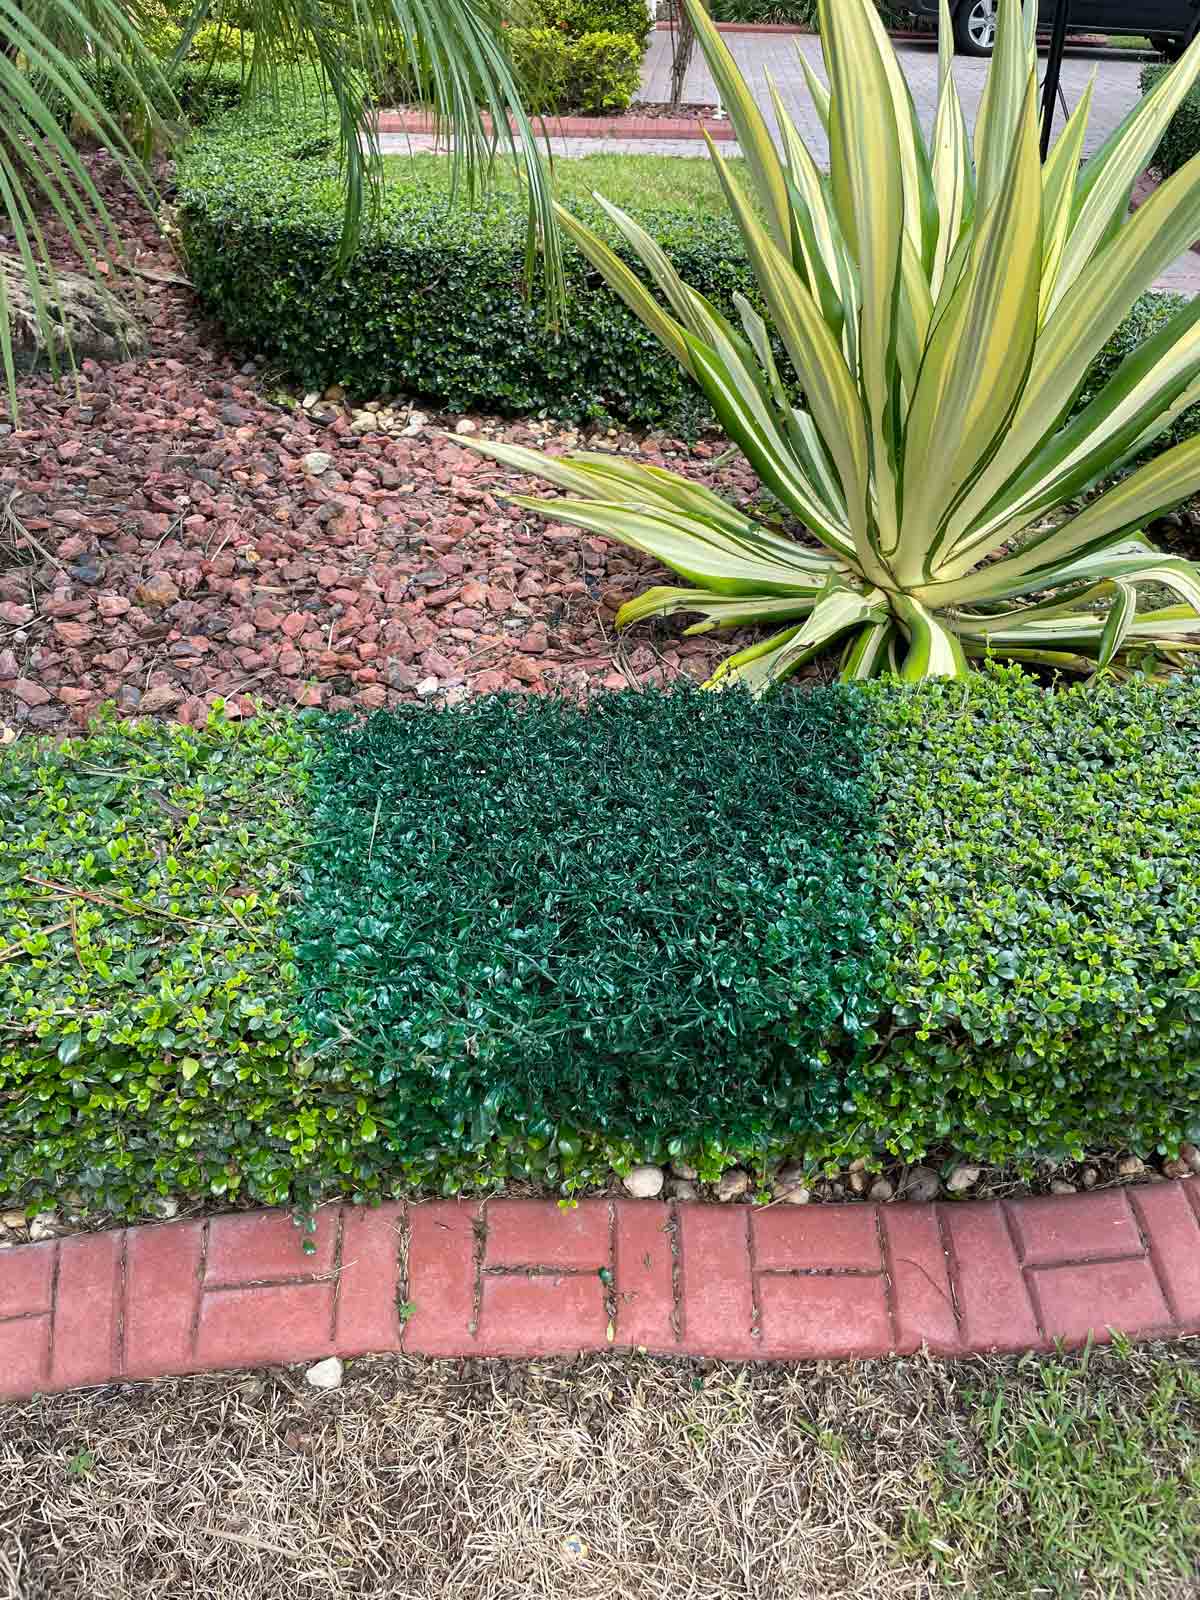 Noticed a section of the hedge had turned brown and died. Mentioned it to my husband, came home to this..